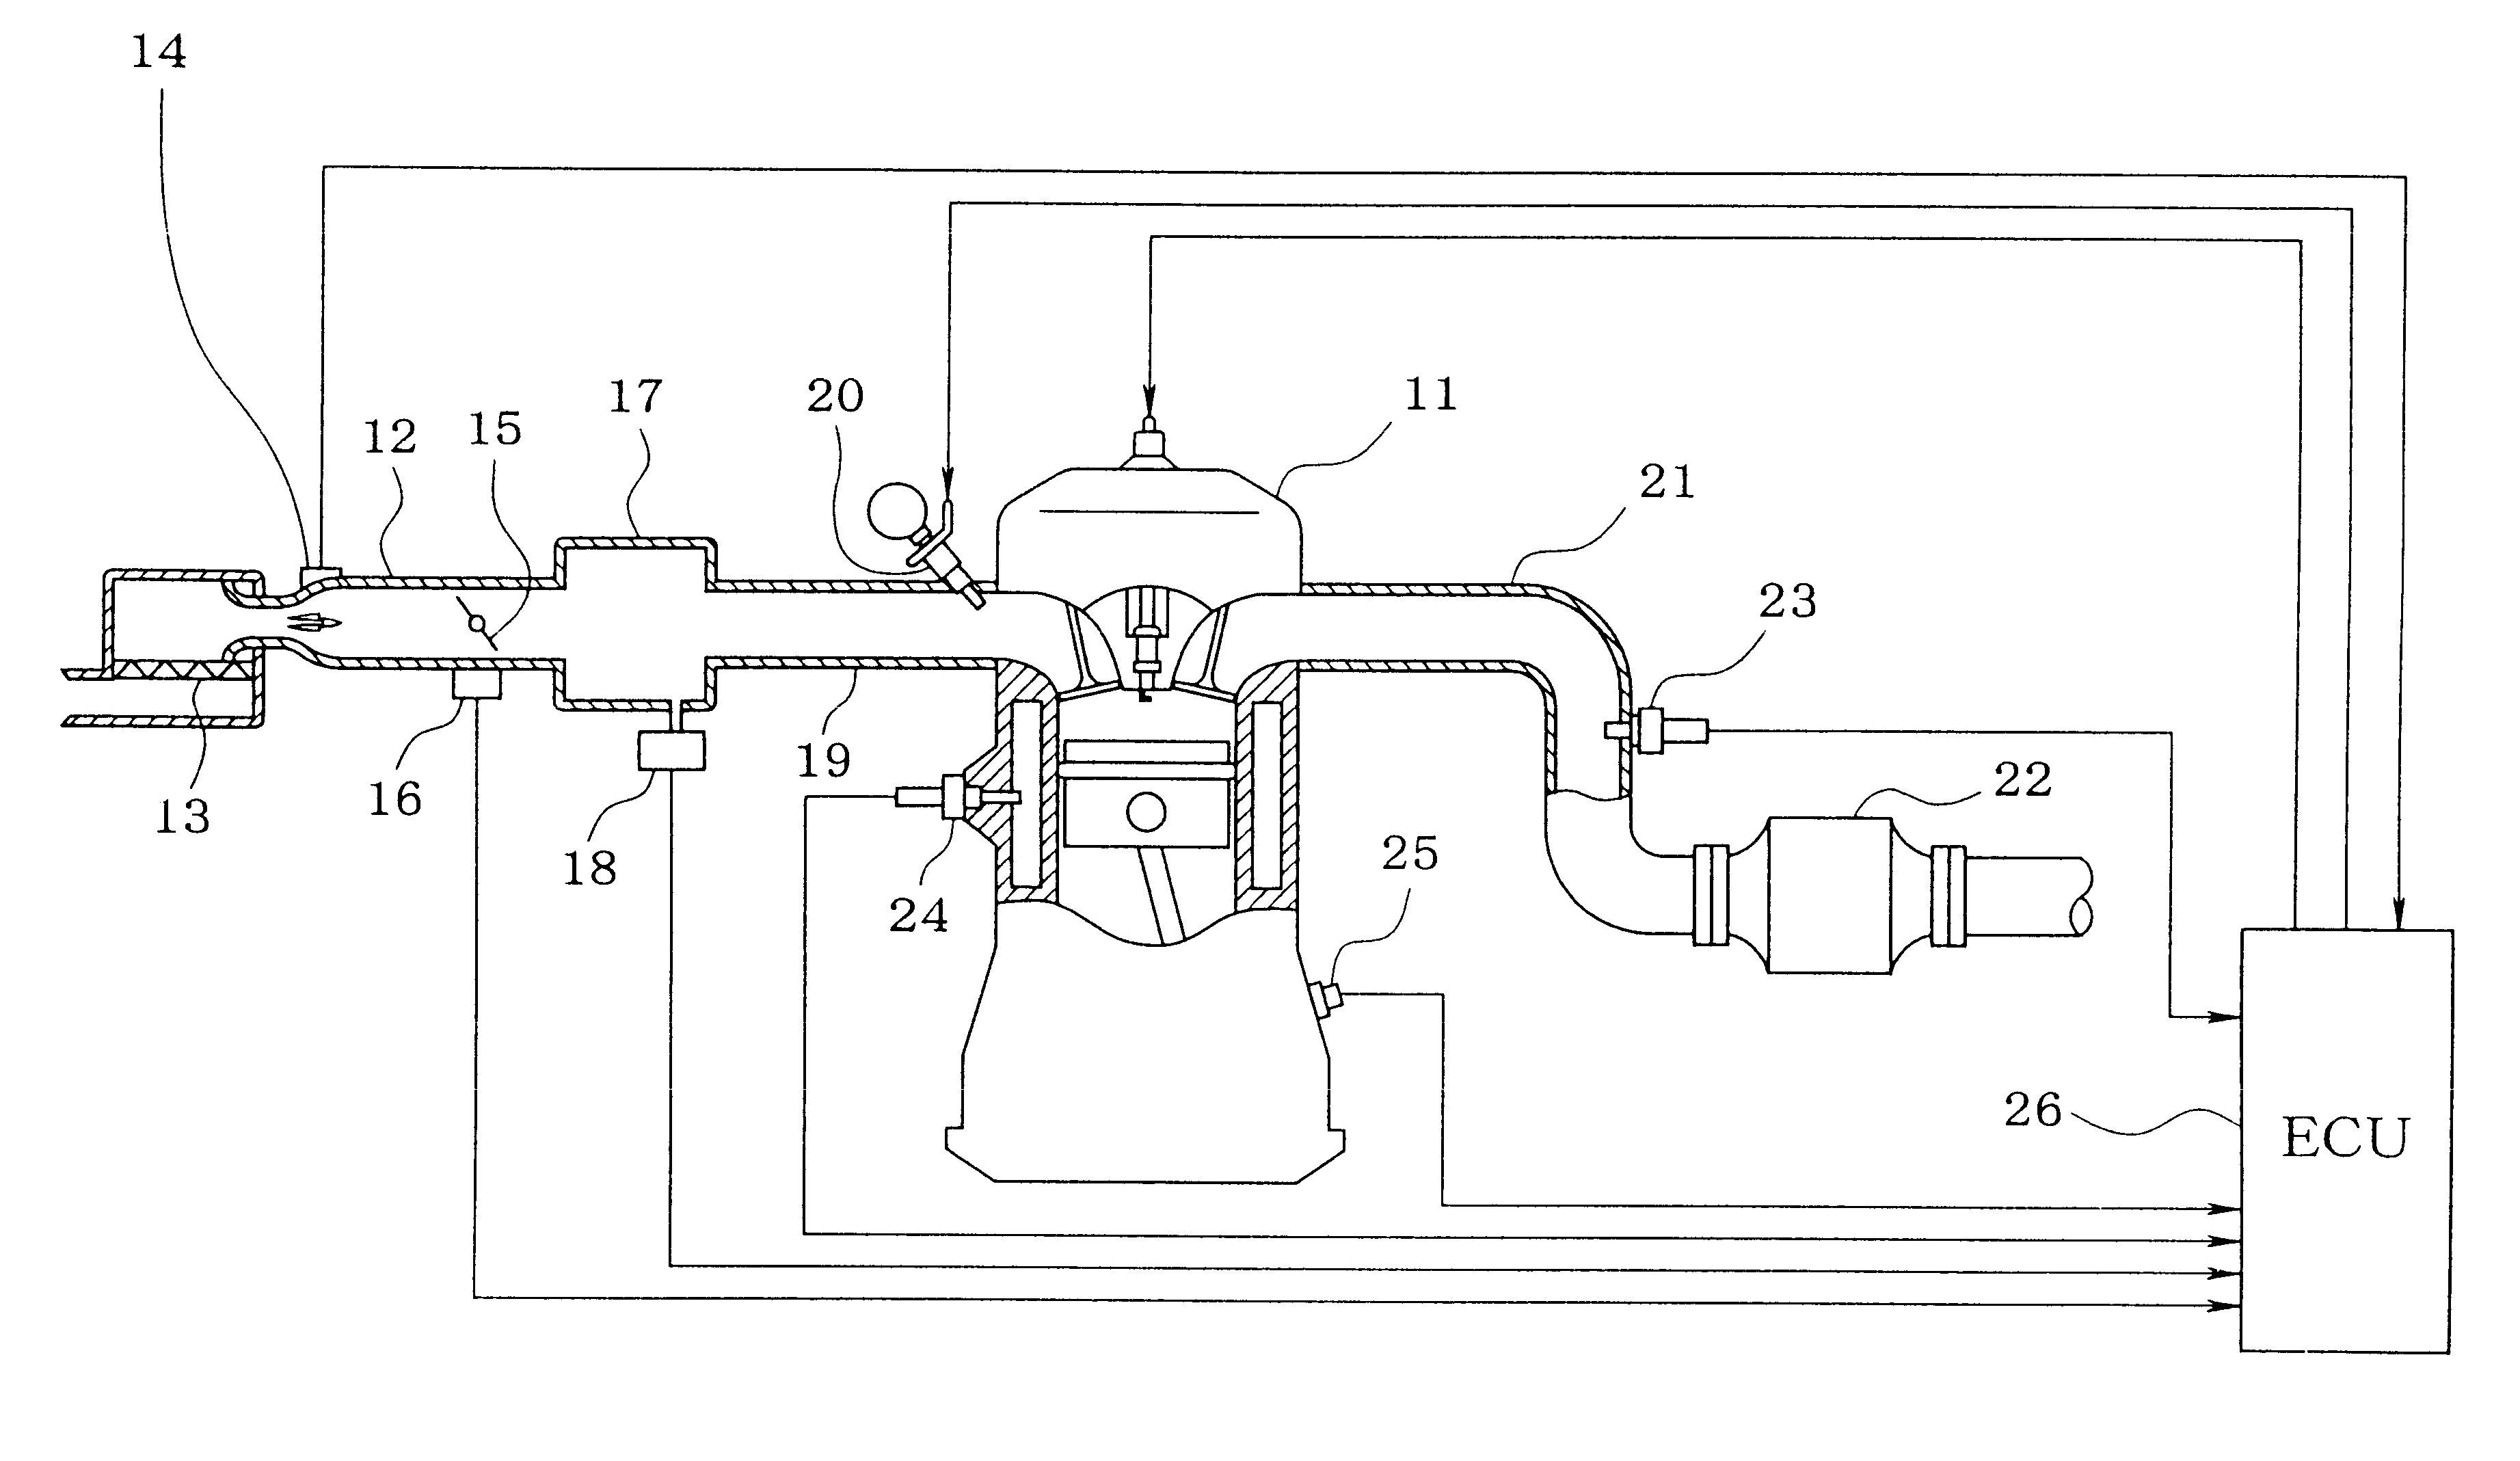 Air-fuel ratio controller of internal combustion engines